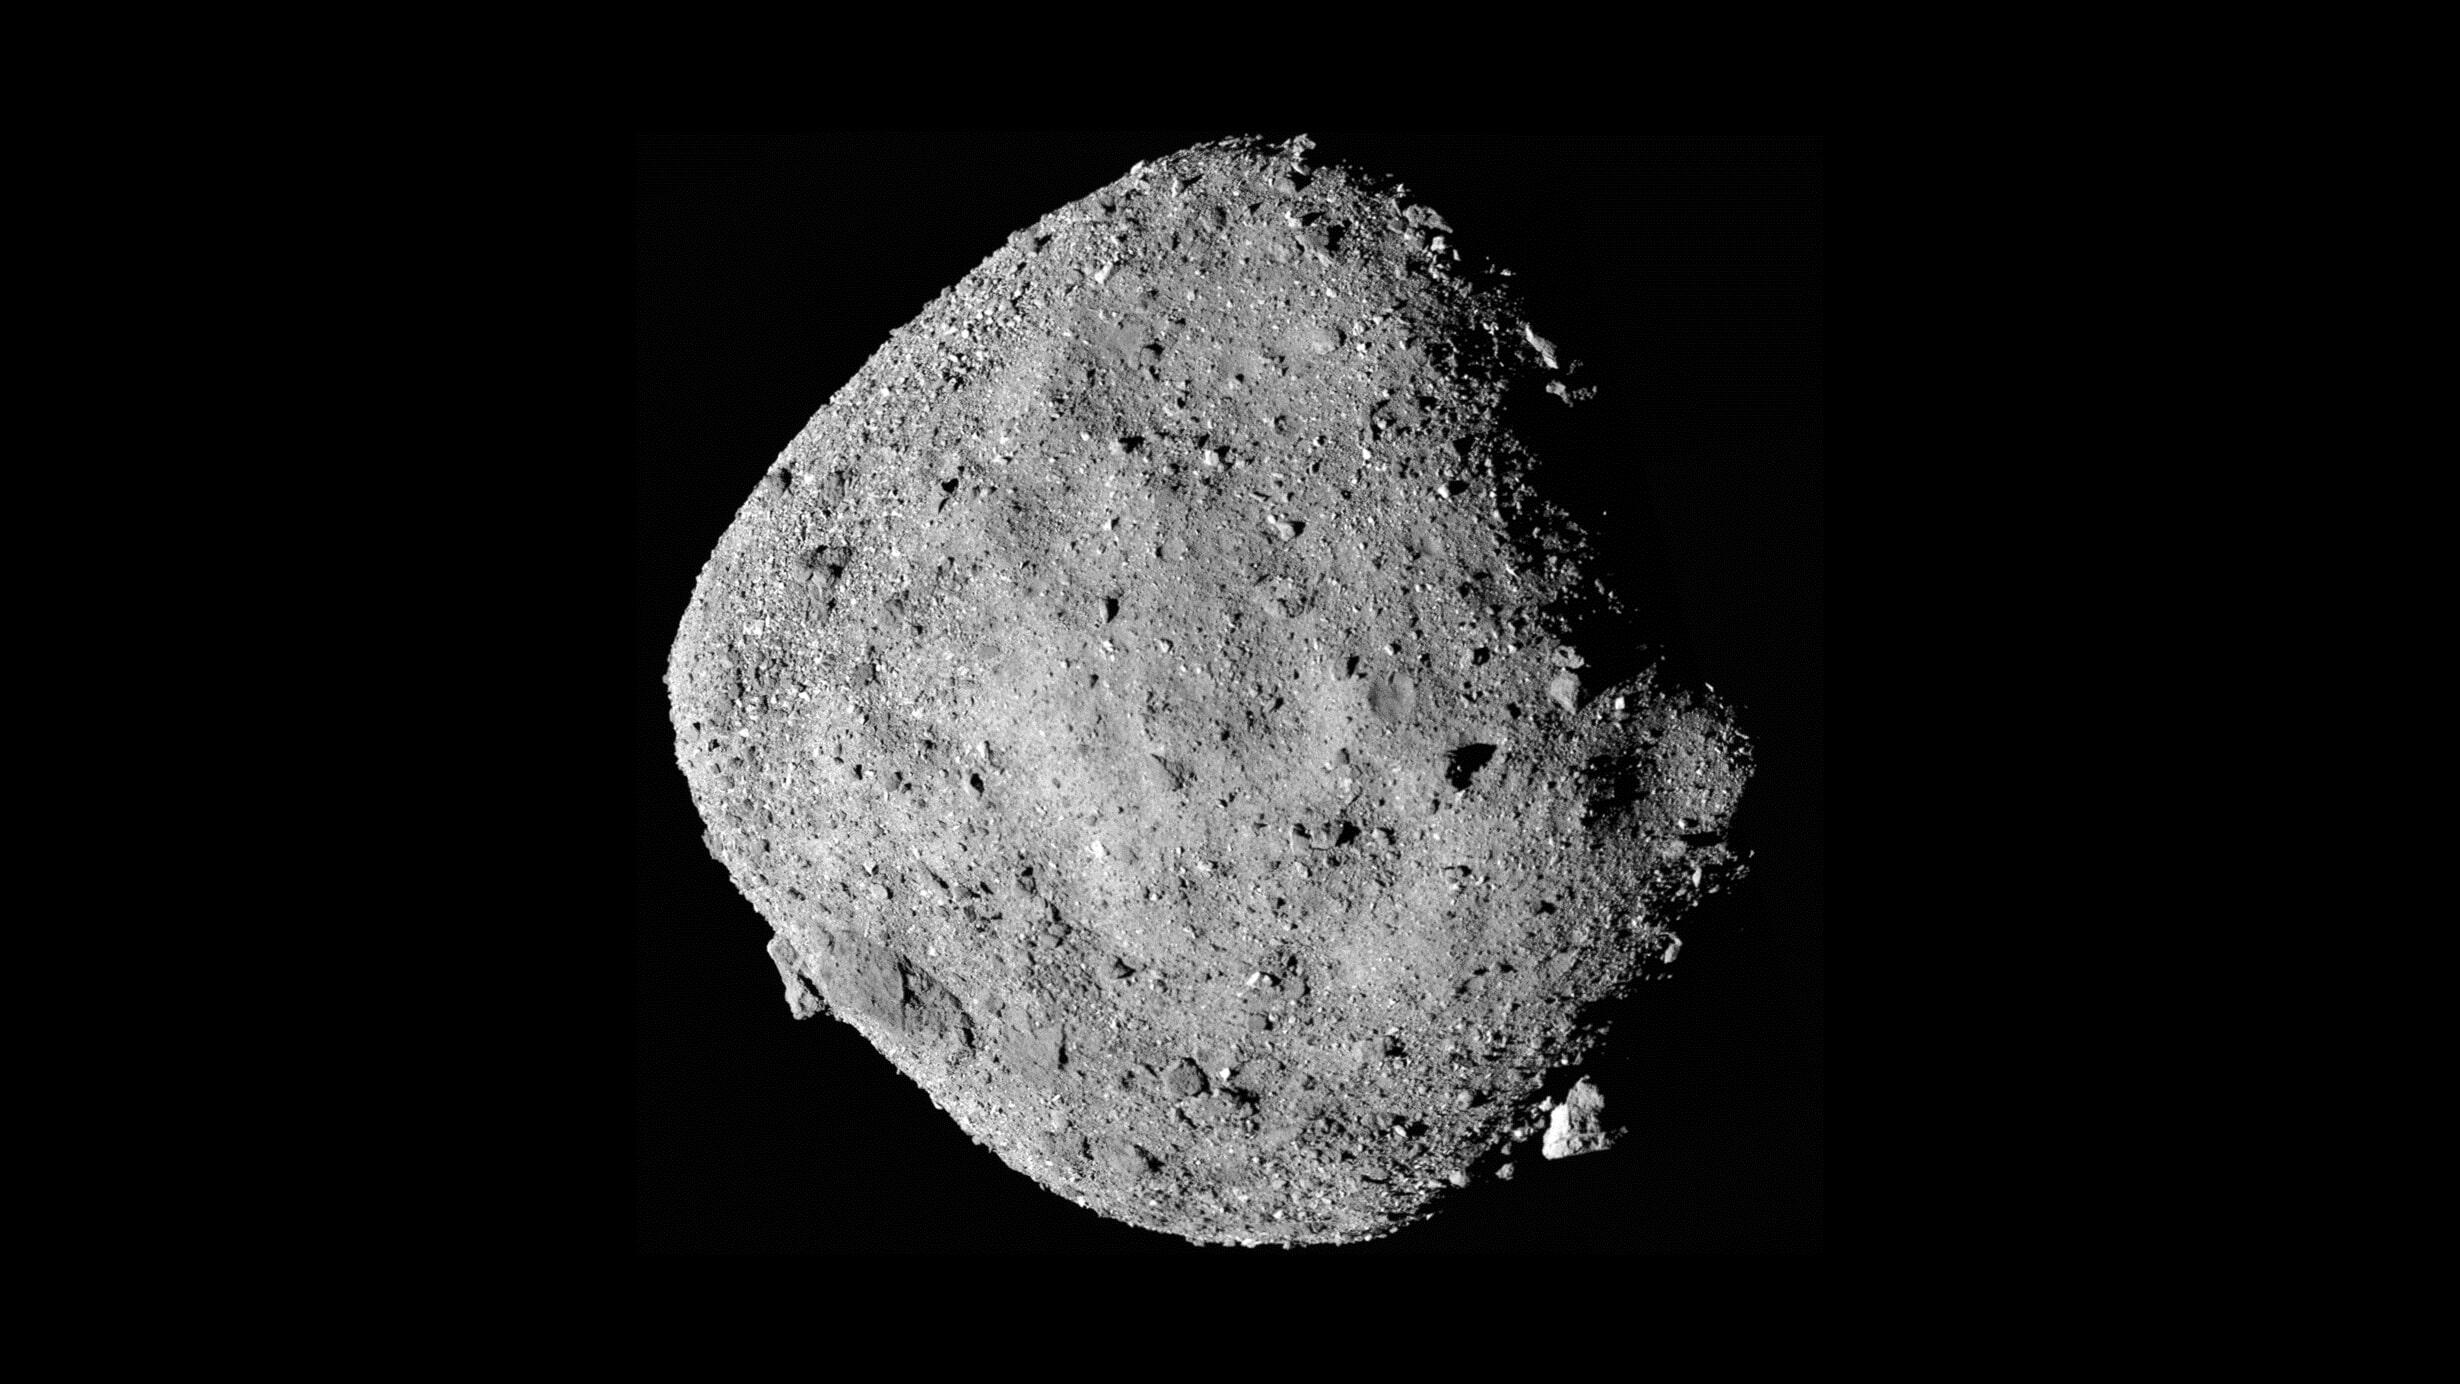 A closeup photograph of the Bennu asteroid, taken by NASA's OSIRIS-REx spacecraft. Bennu is rocky, with a roughly spheroidal shape.